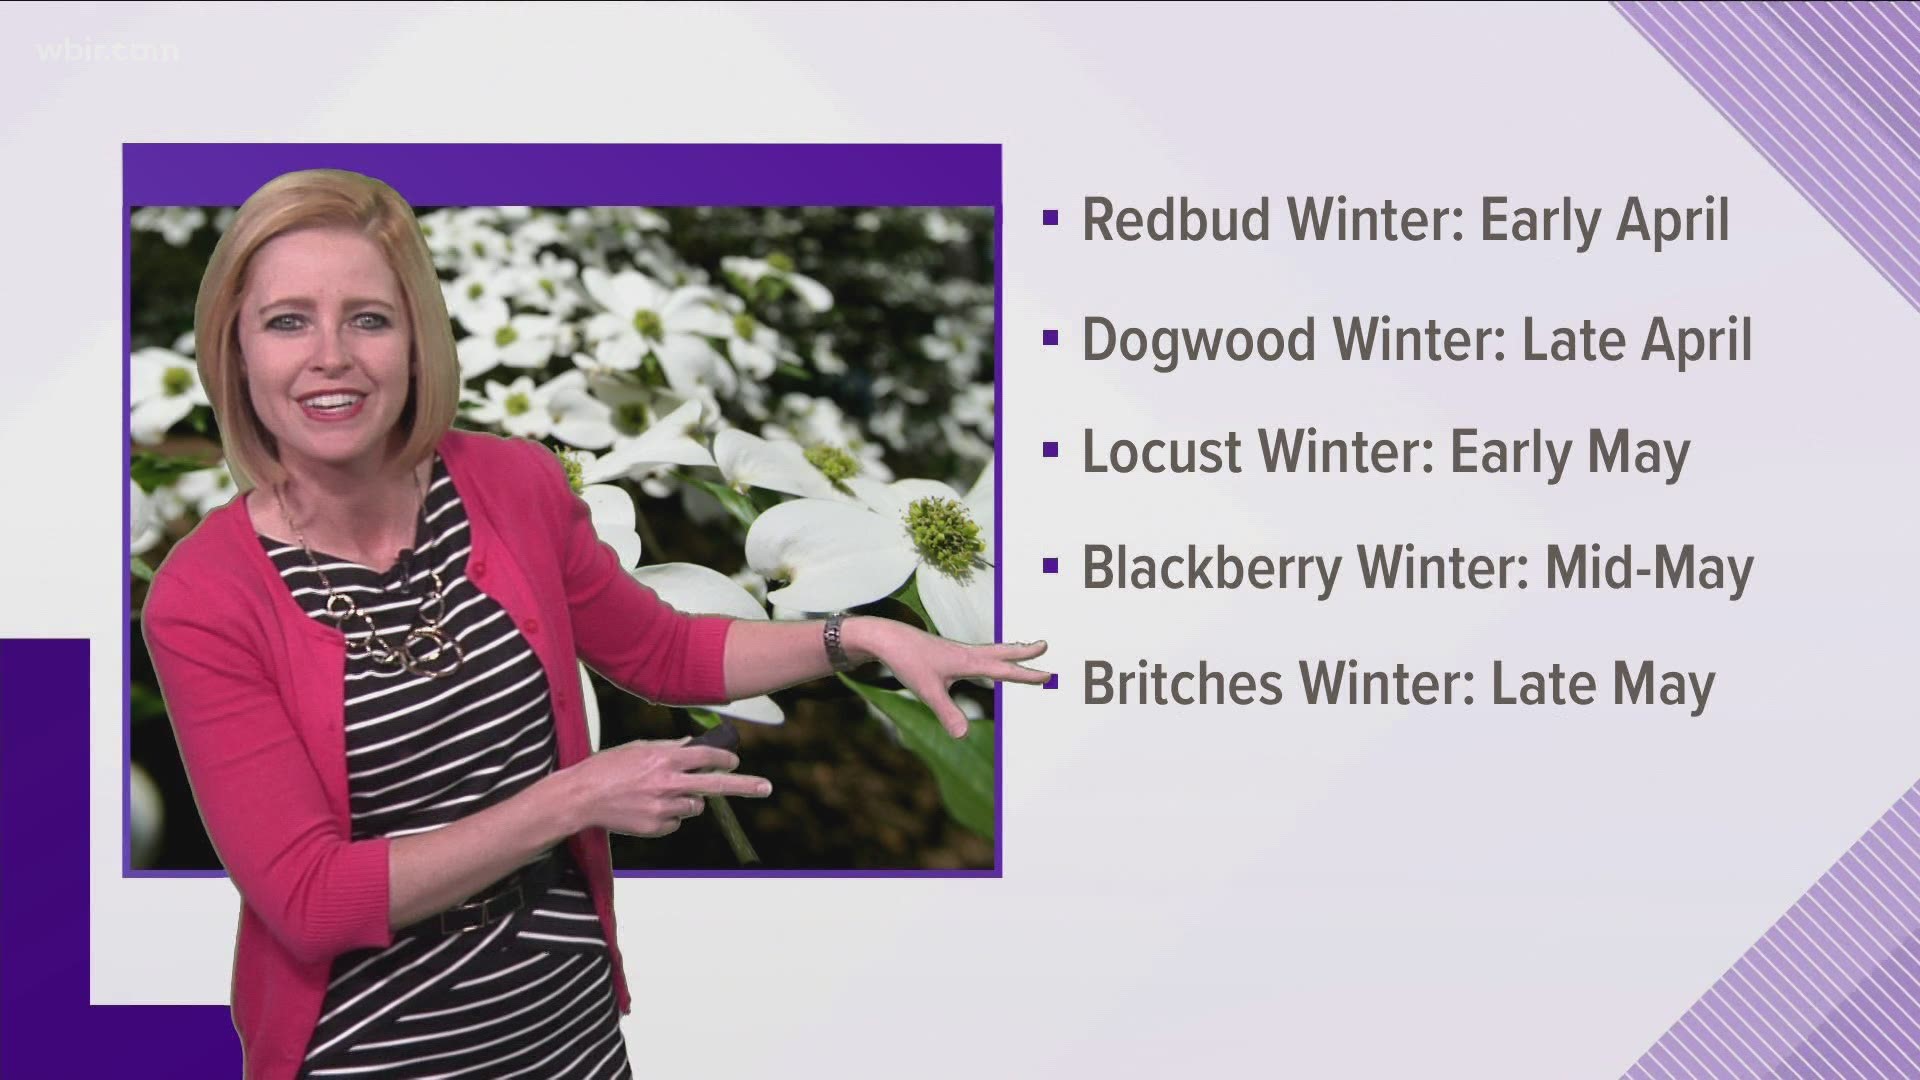 10Weather's Cassie Nall breaks down the difference between the various 'winters' that occur as spring tries to hit its stride.